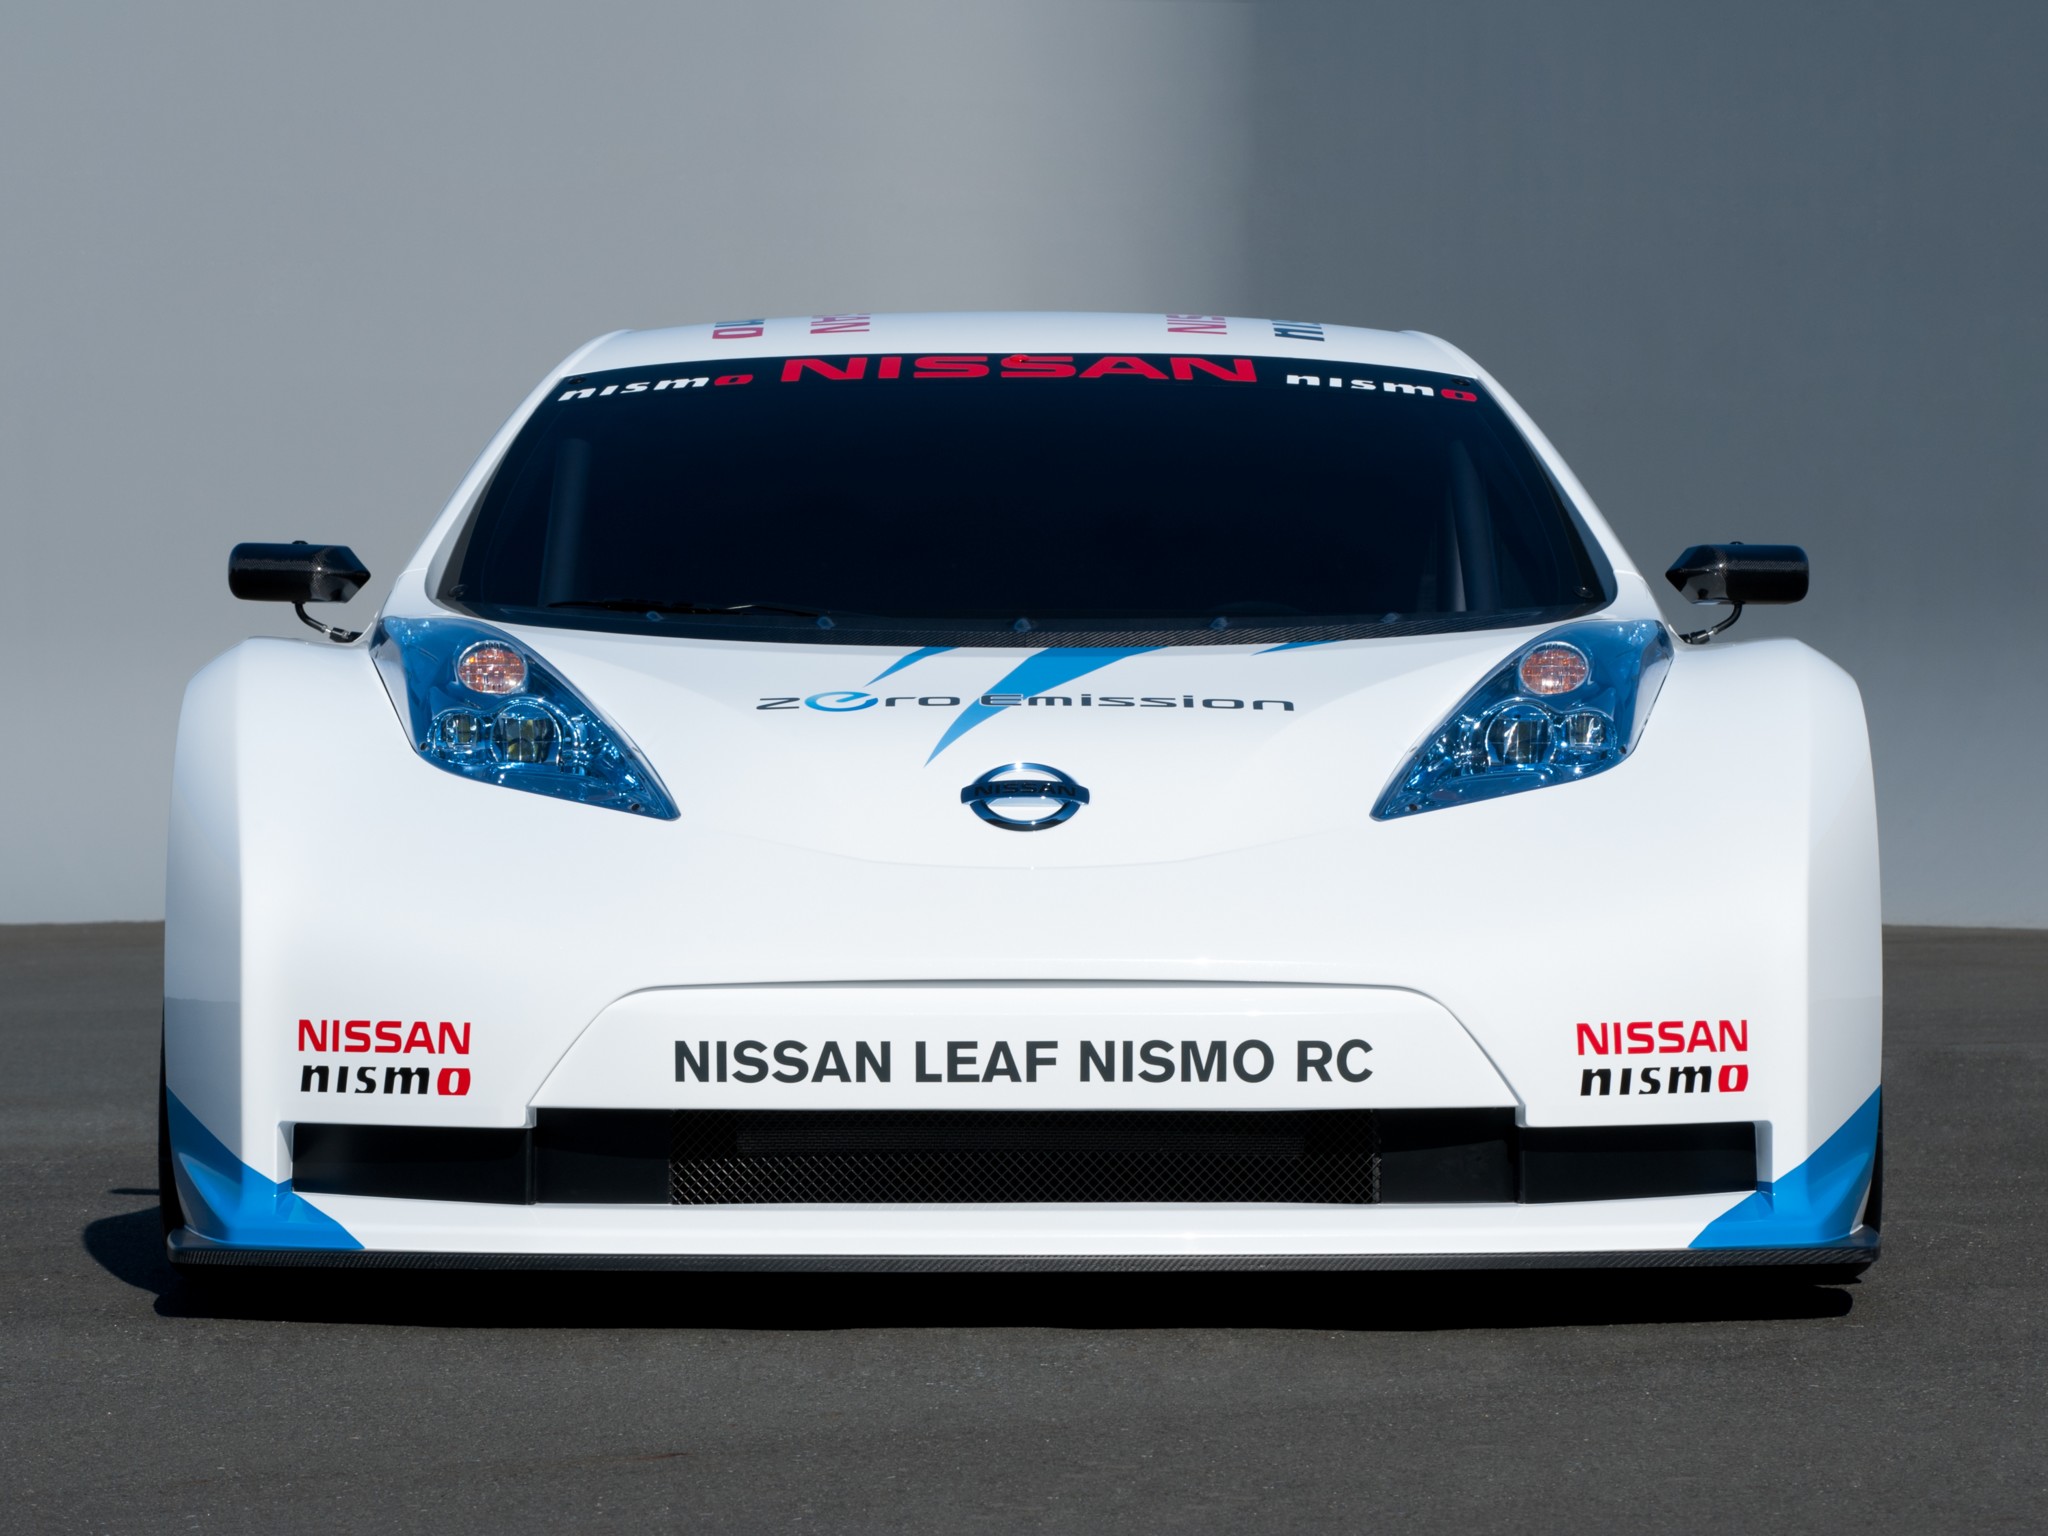 2011, Nissan, Leaf, Nismo, R c, Race, Racing, Tuning, Electric, Supercar, Supercars, Fp Wallpaper